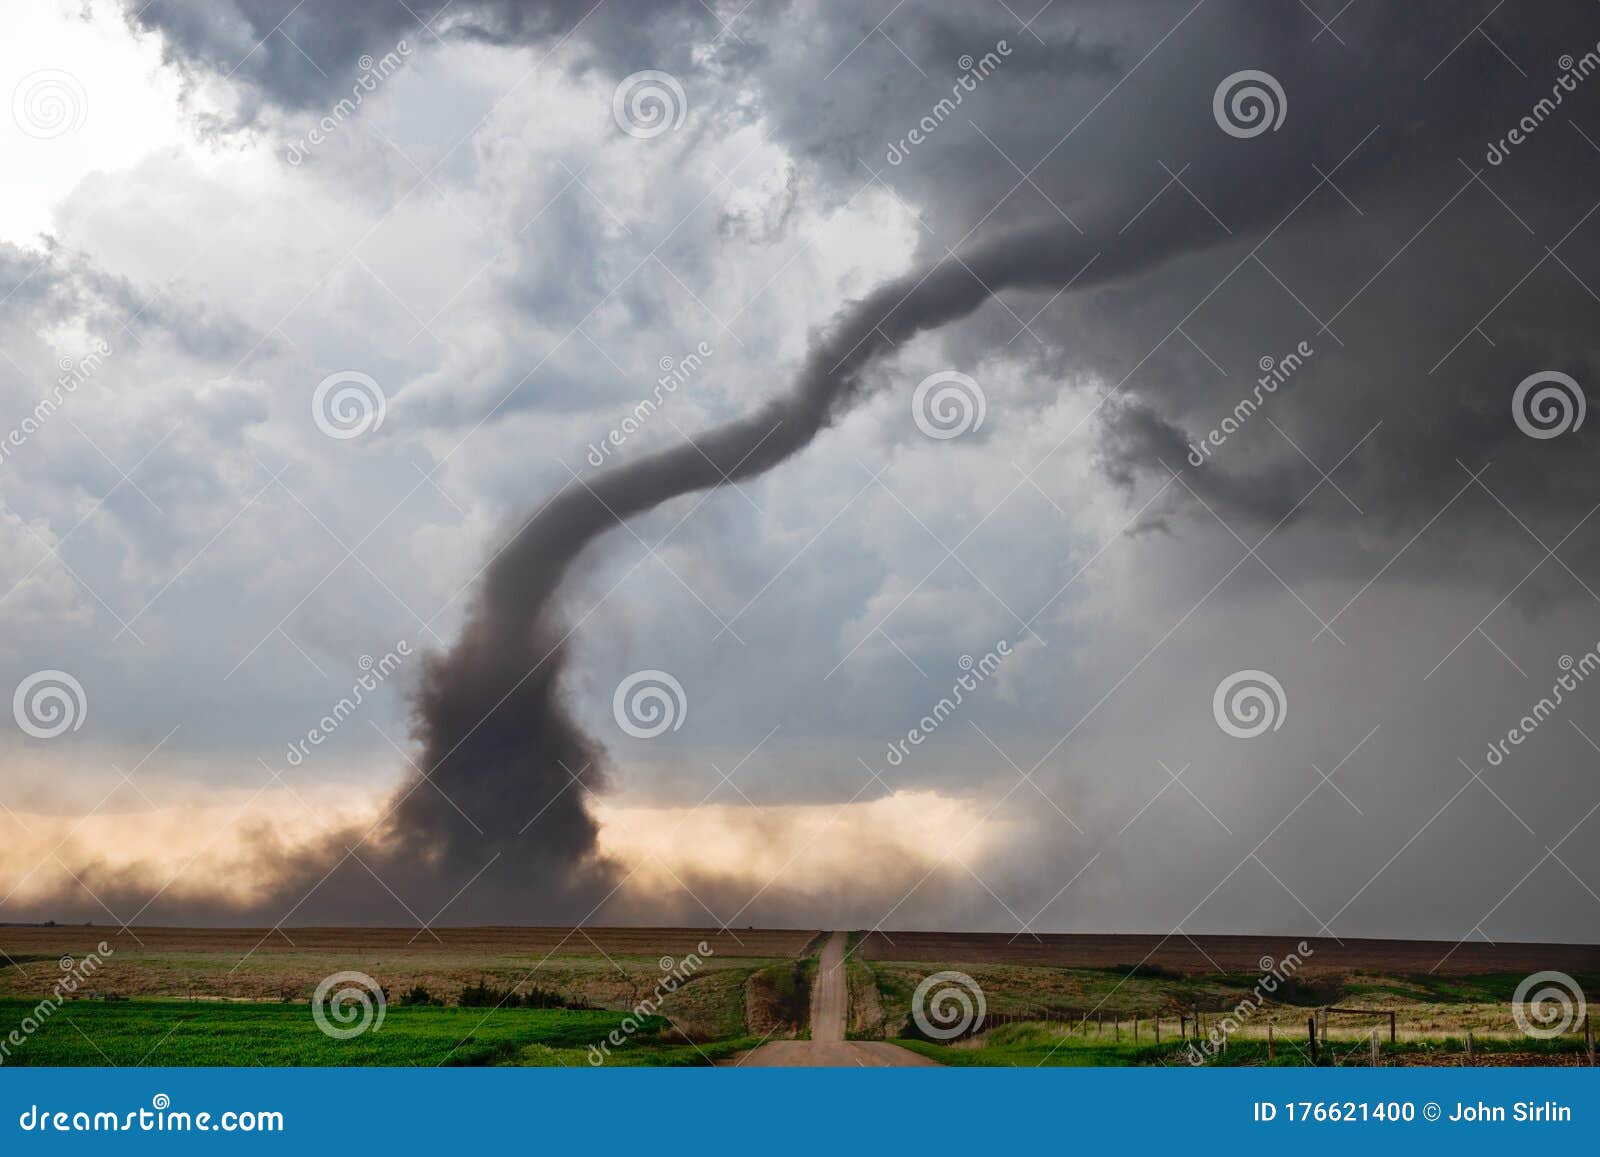 tornado during a severe weather outbreak